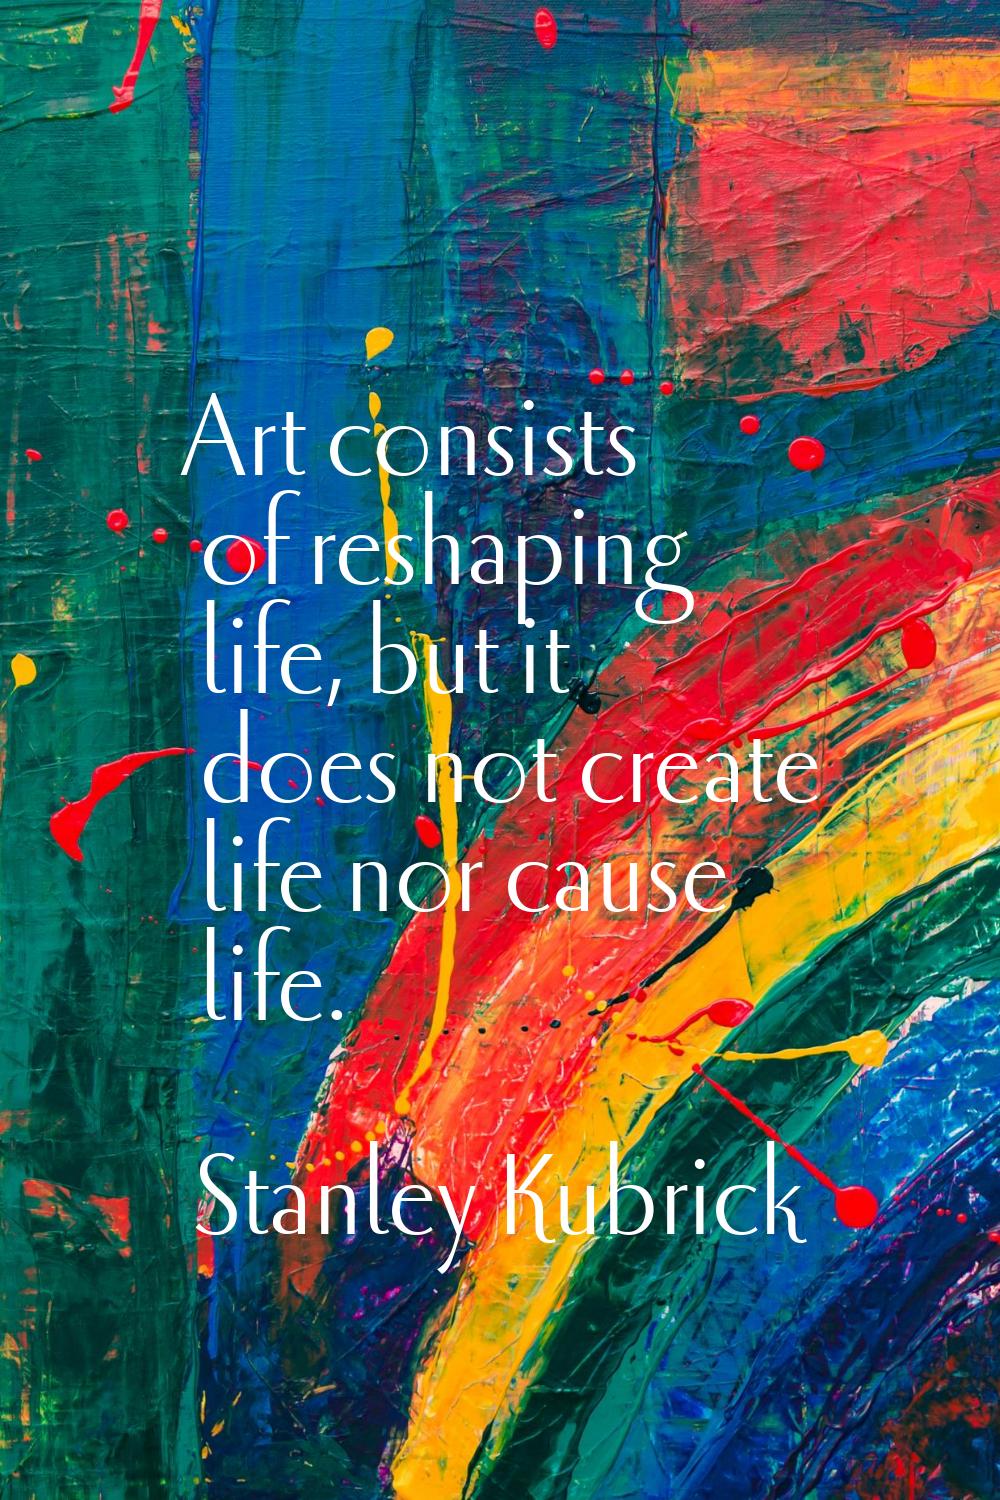 Art consists of reshaping life, but it does not create life nor cause life.